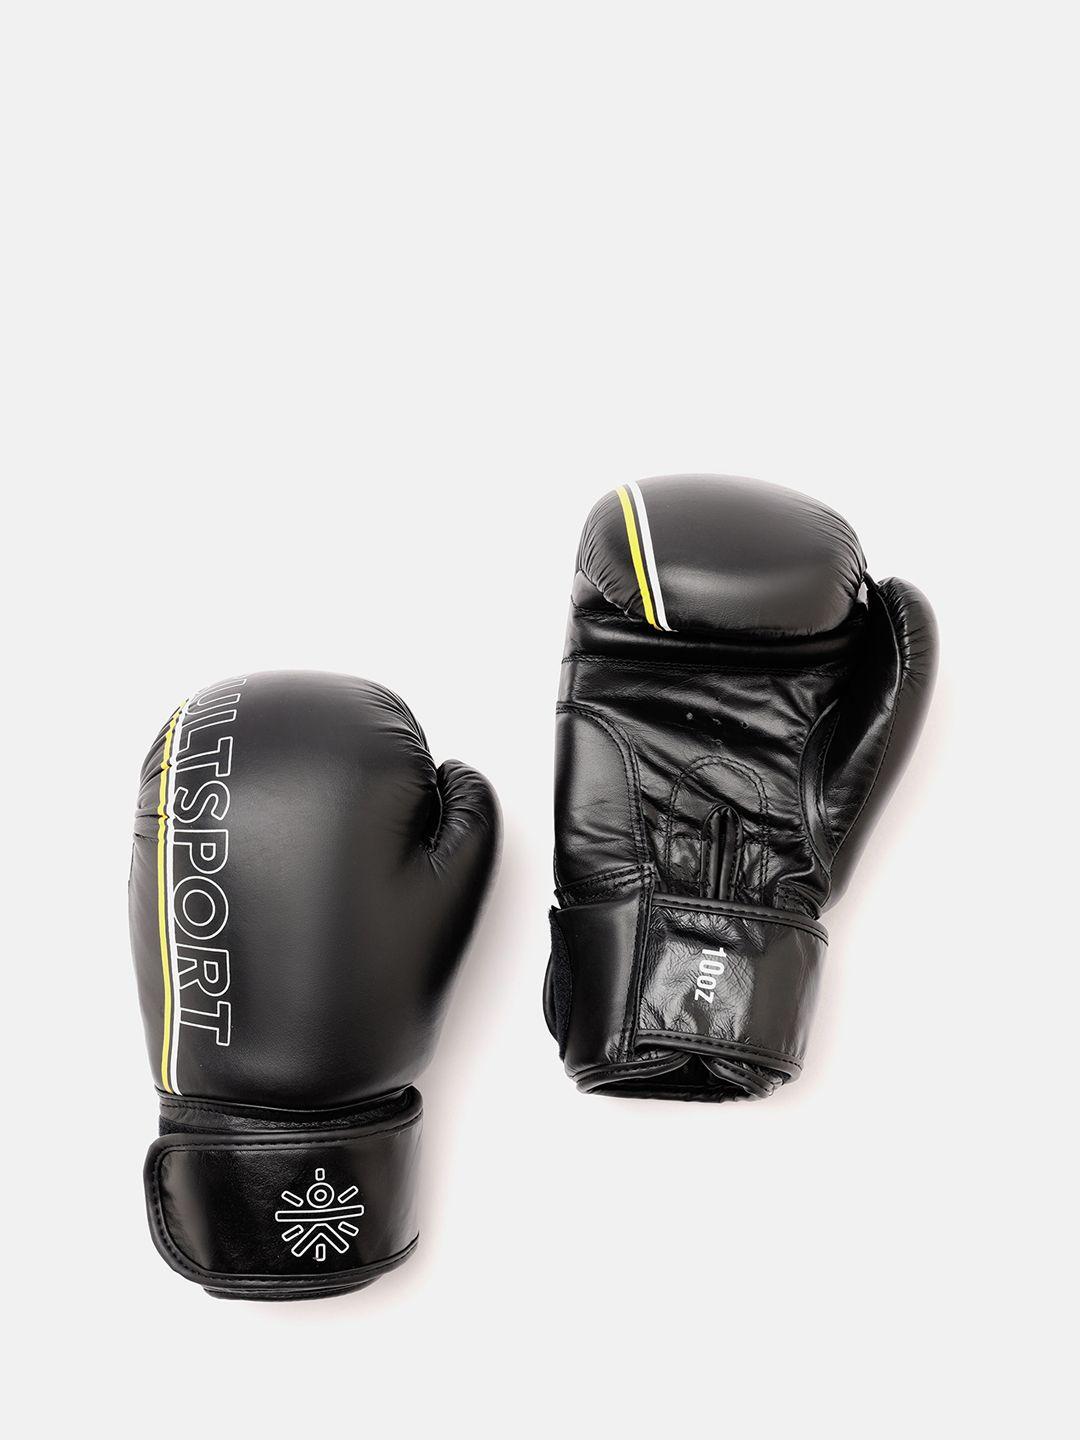 cultsport brand logo printed premium leather boxing gloves with antimicrobial lining